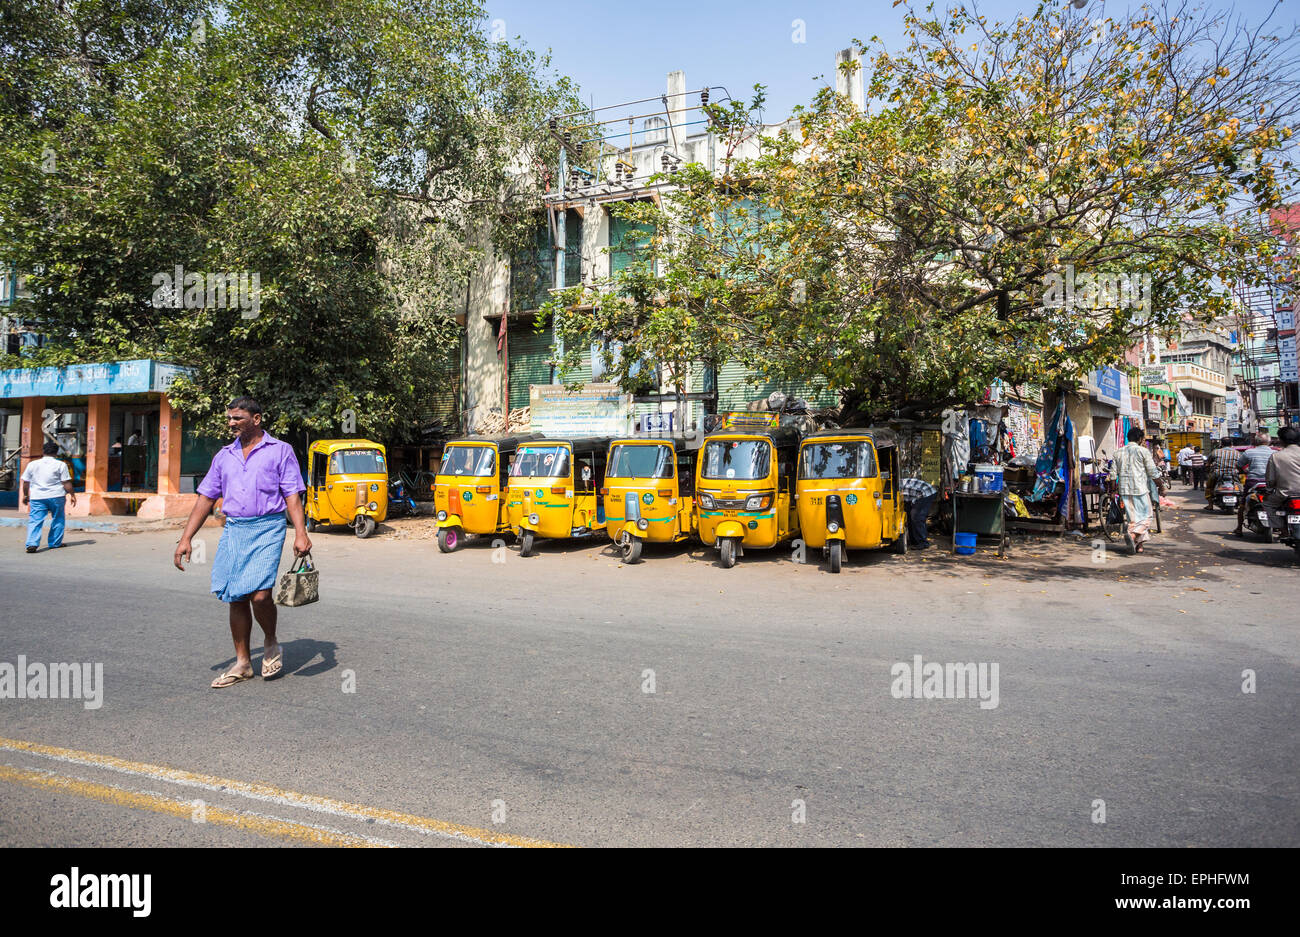 Local Indian man crossing the road in front of a row of parked yellow auto rickshaws taxi cabs, street scene, Chennai, Tamil Nadu, India Stock Photo